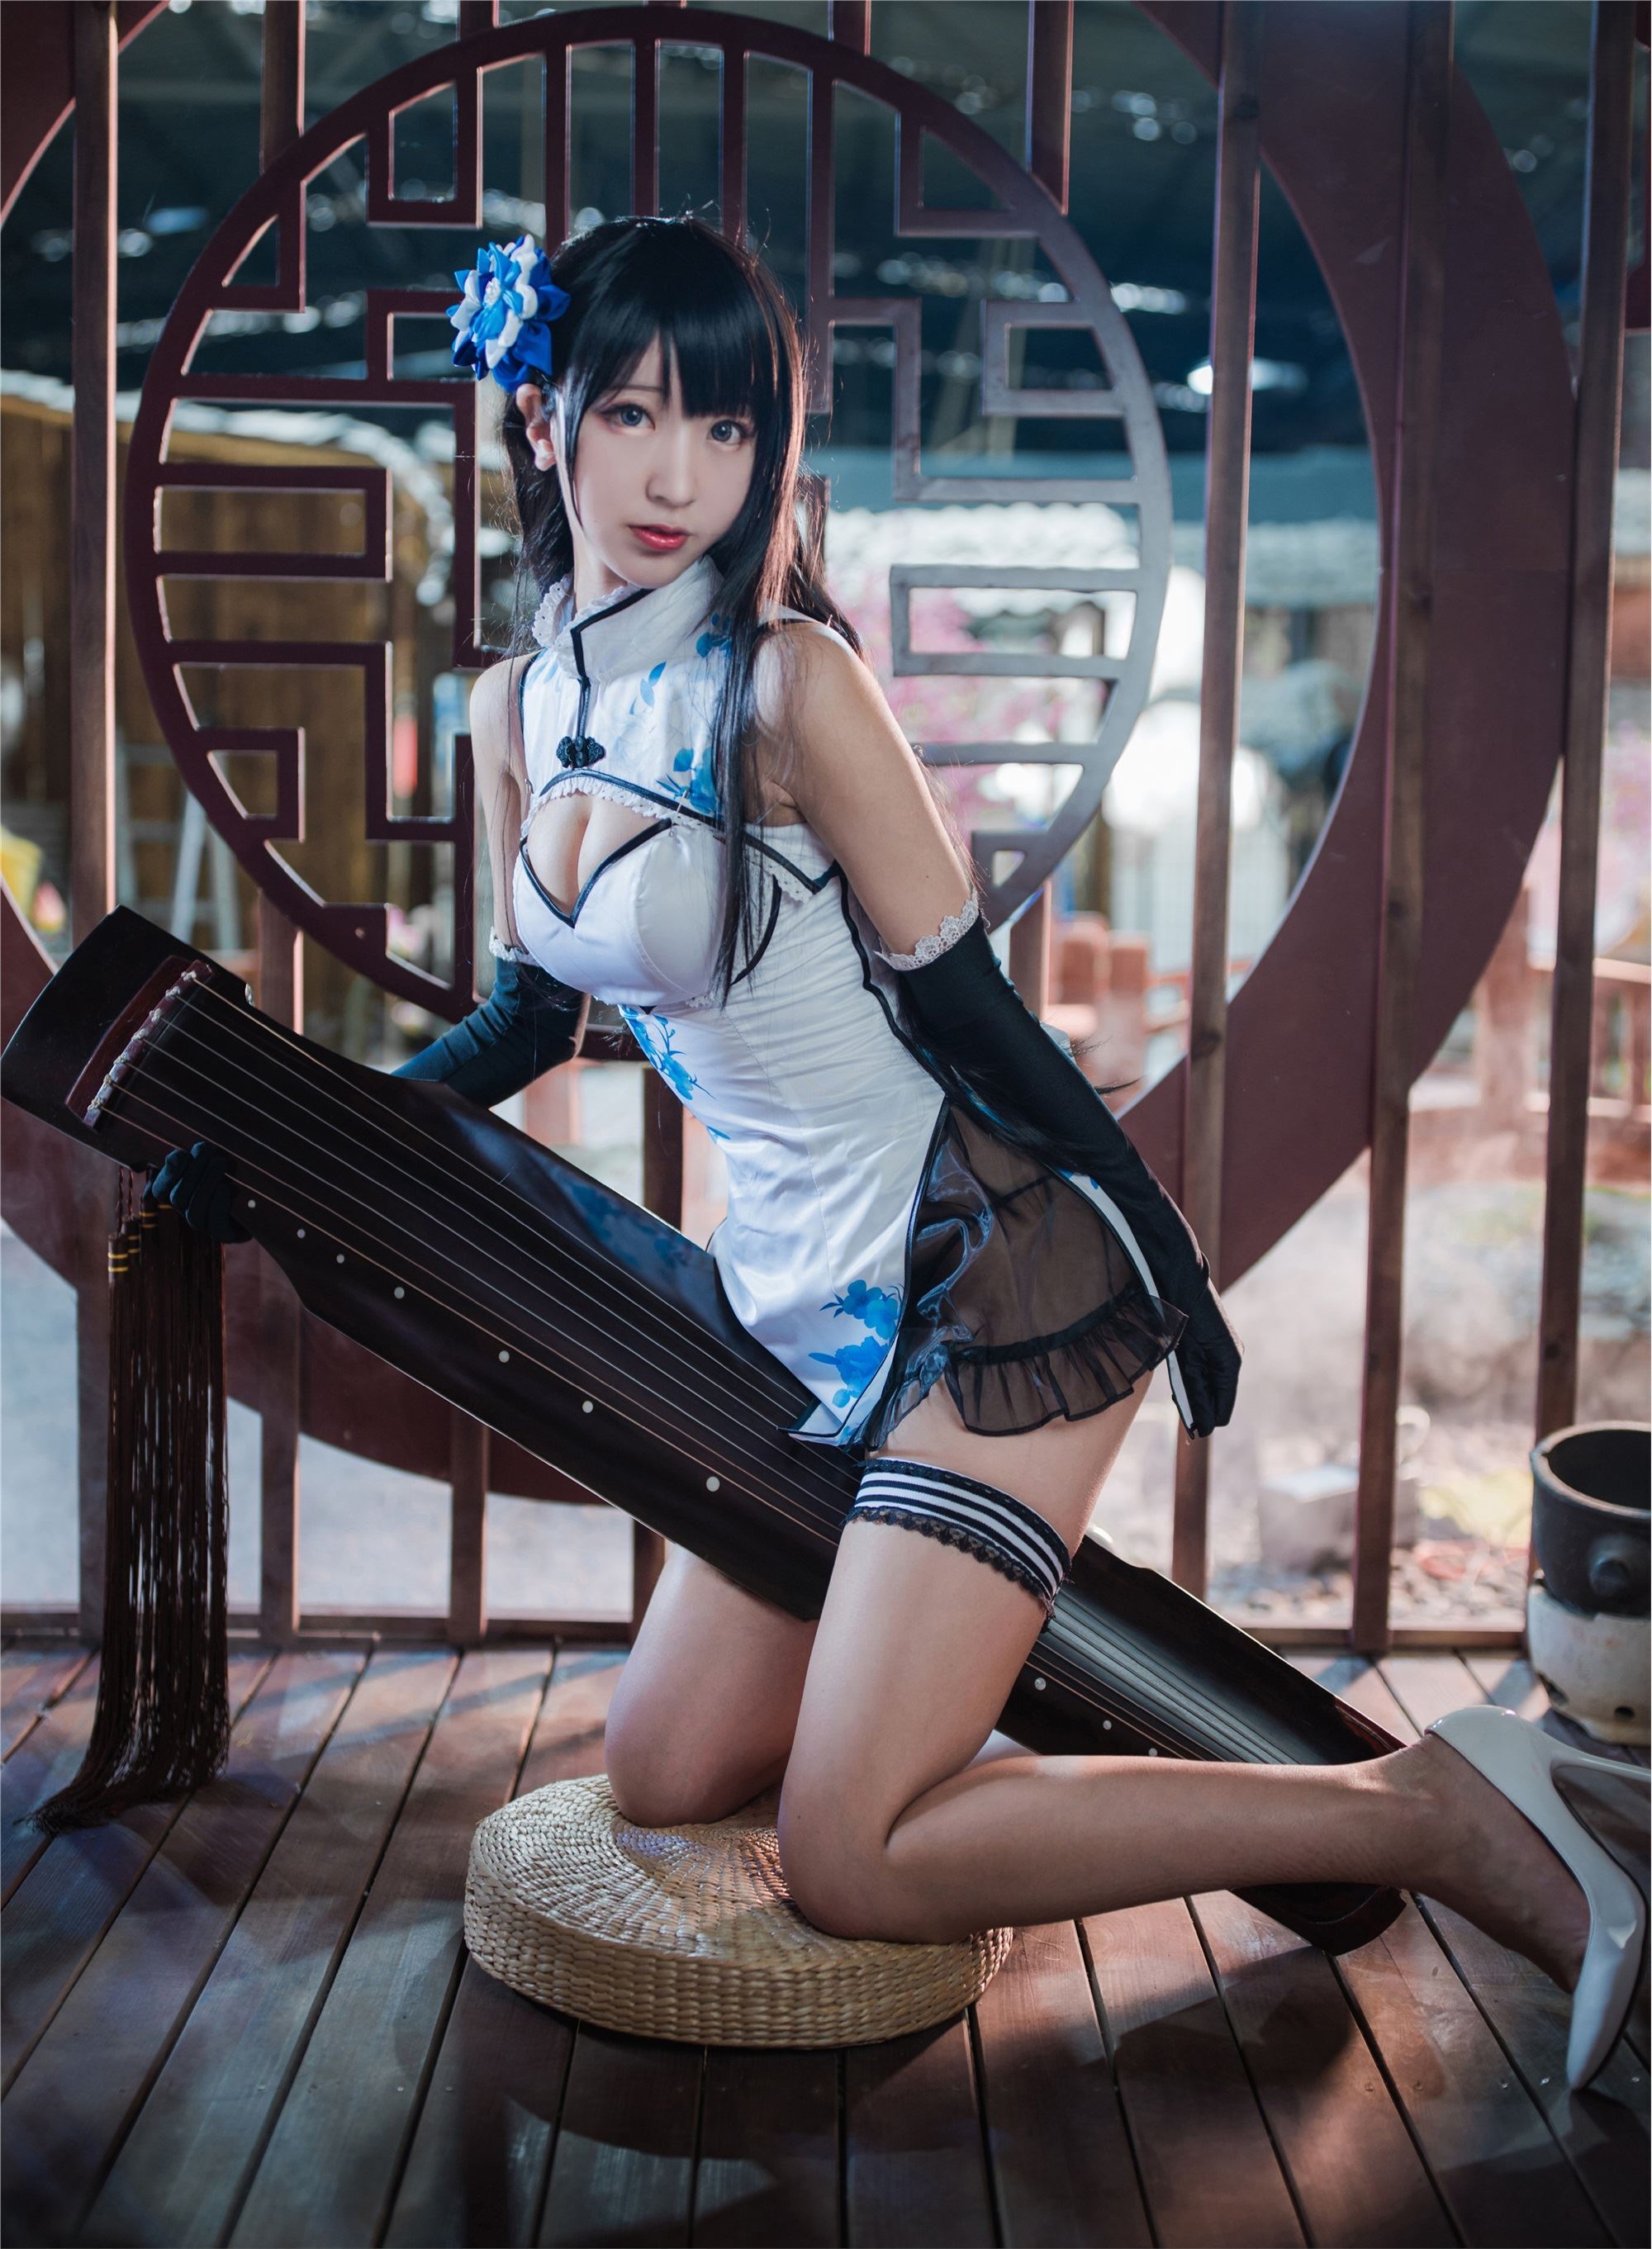 Younger sister of Coser Heichuan